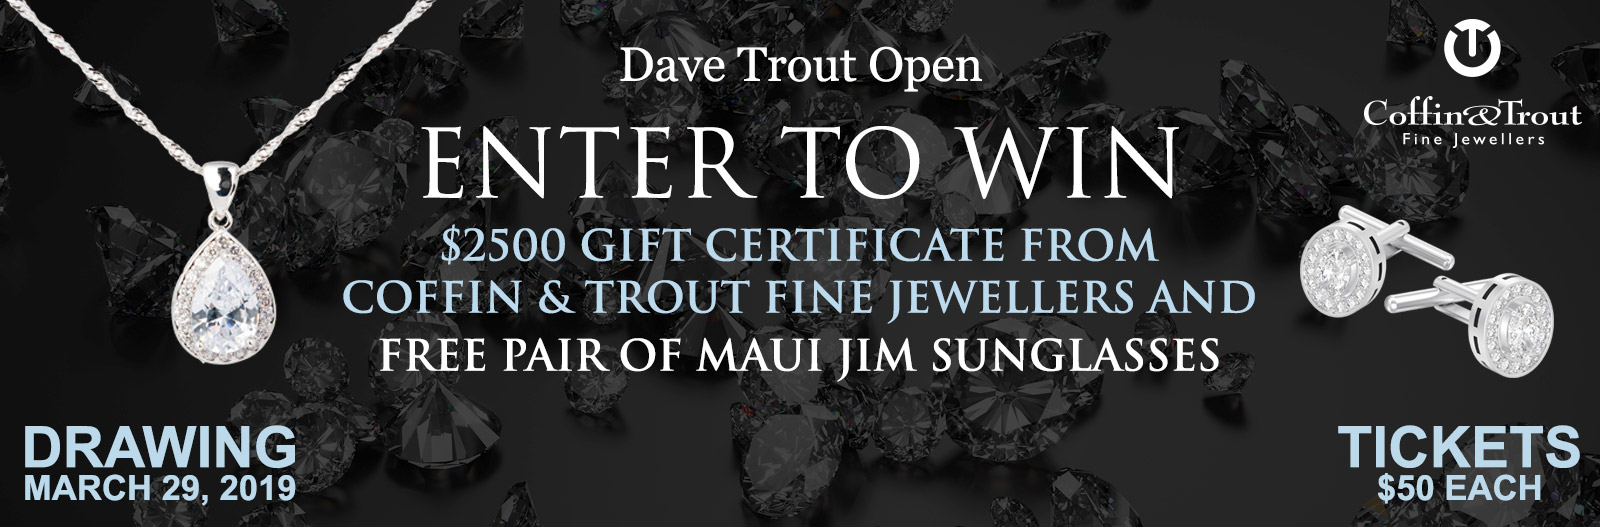 Dave Trout Open Ticket